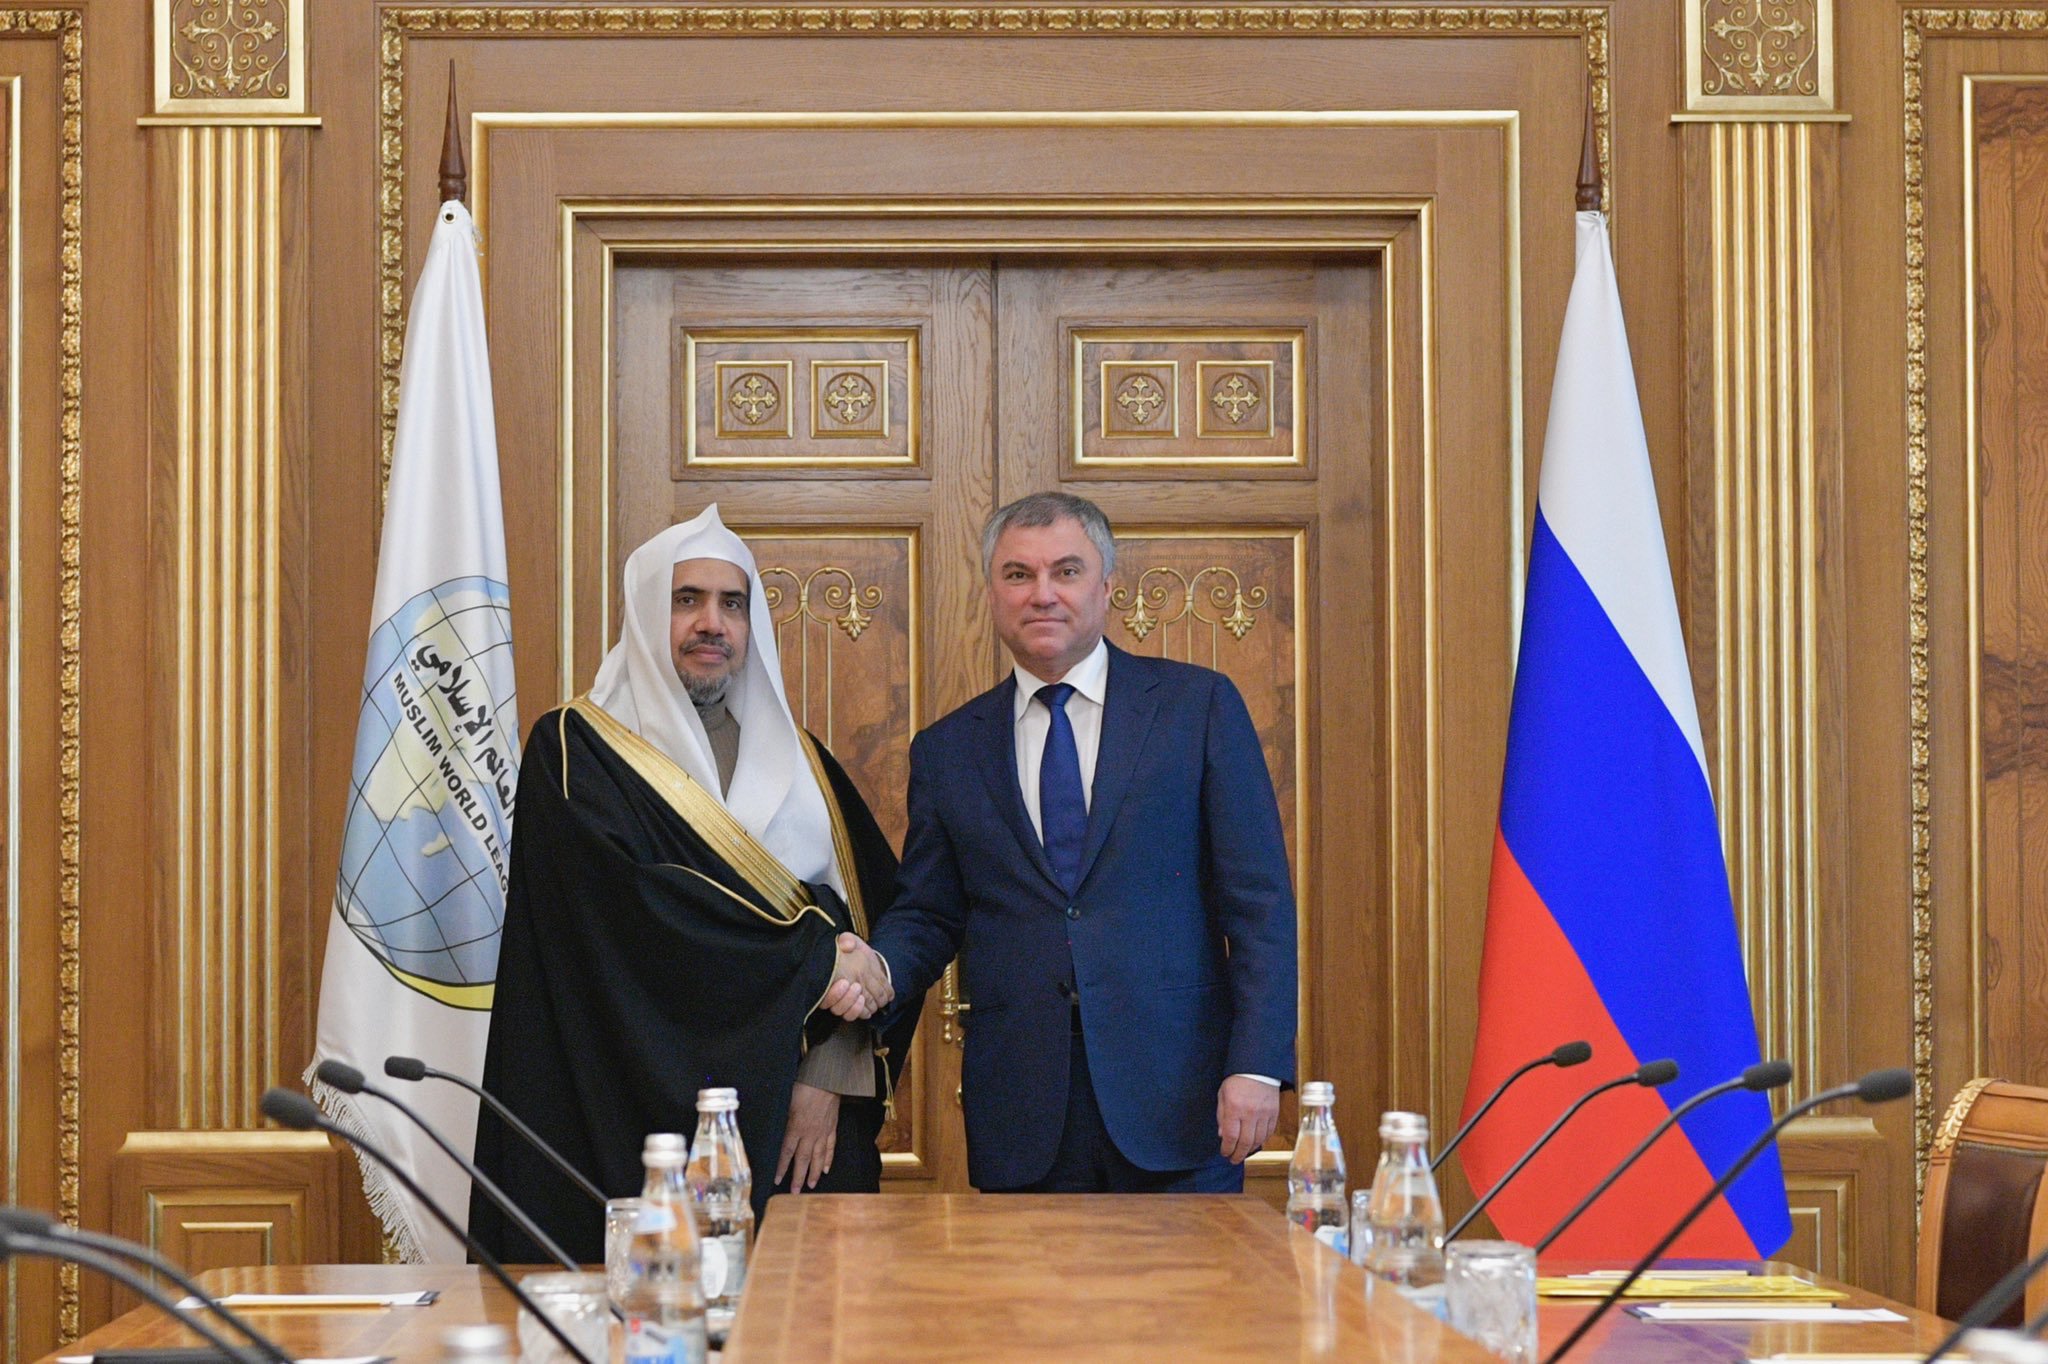 HE Dr. Mohammad Alissa engaged with the Chairman of the Russian State Duma earlier this year